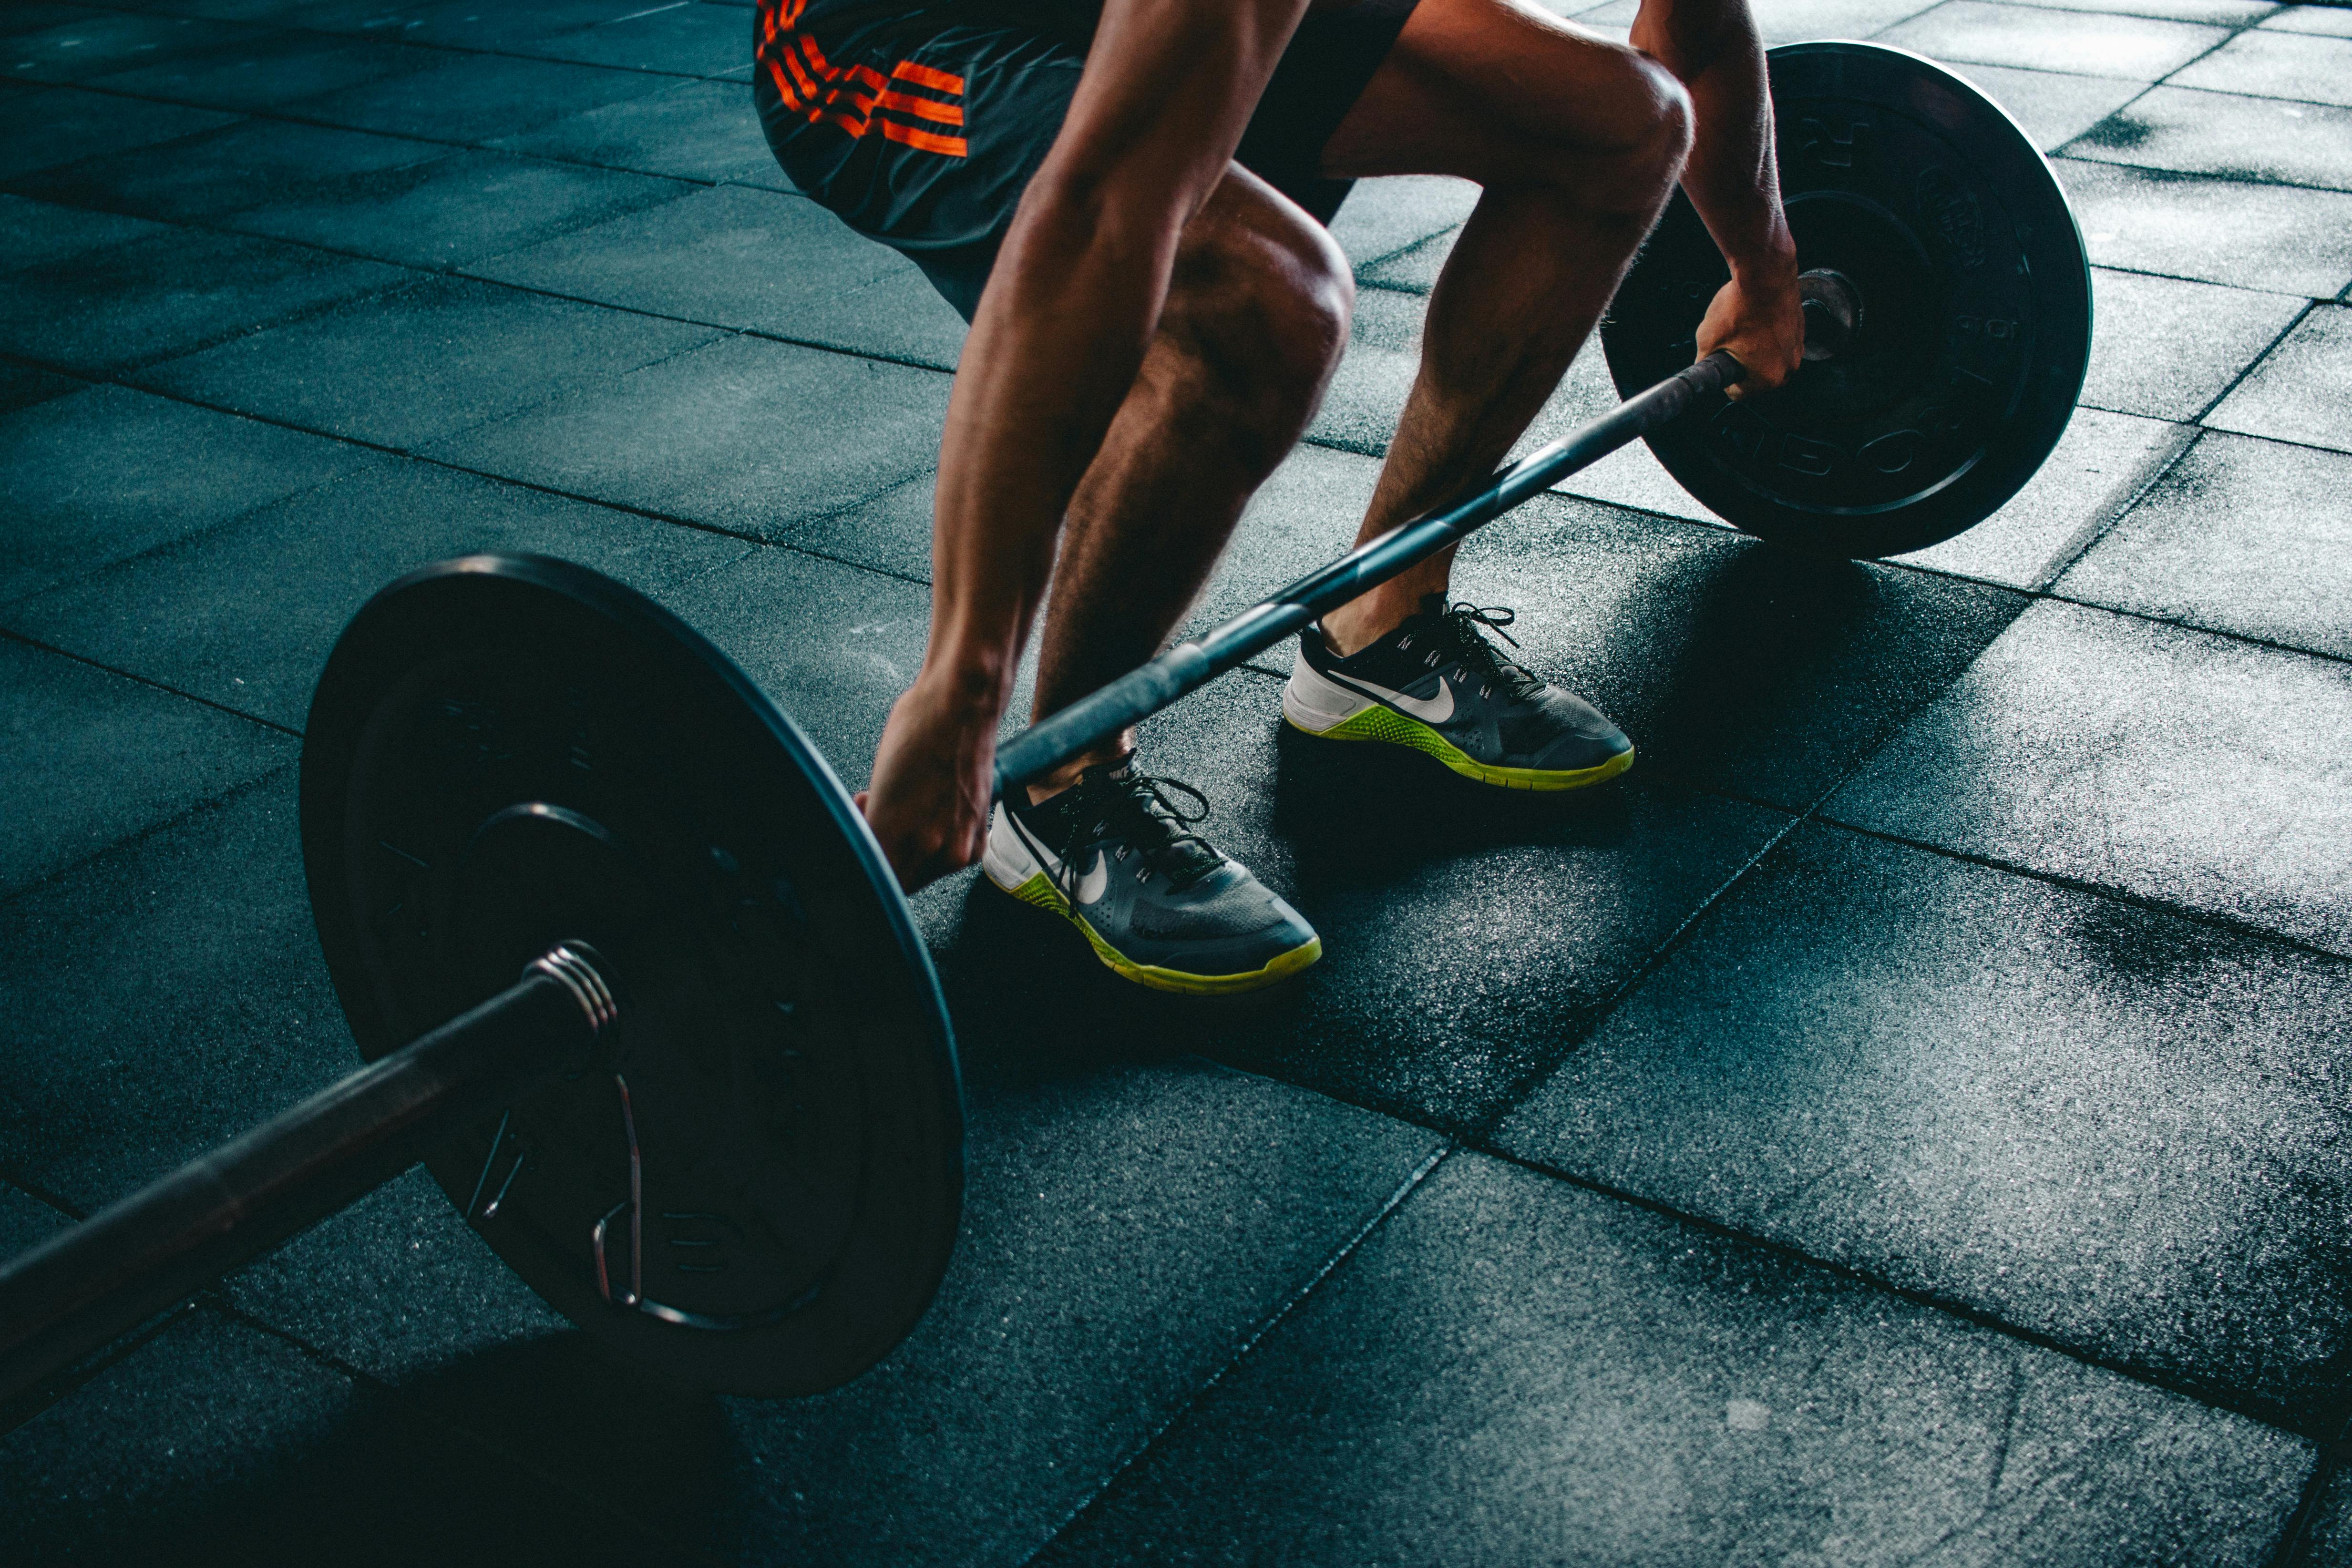 The best leg exercises according to professional athletes and